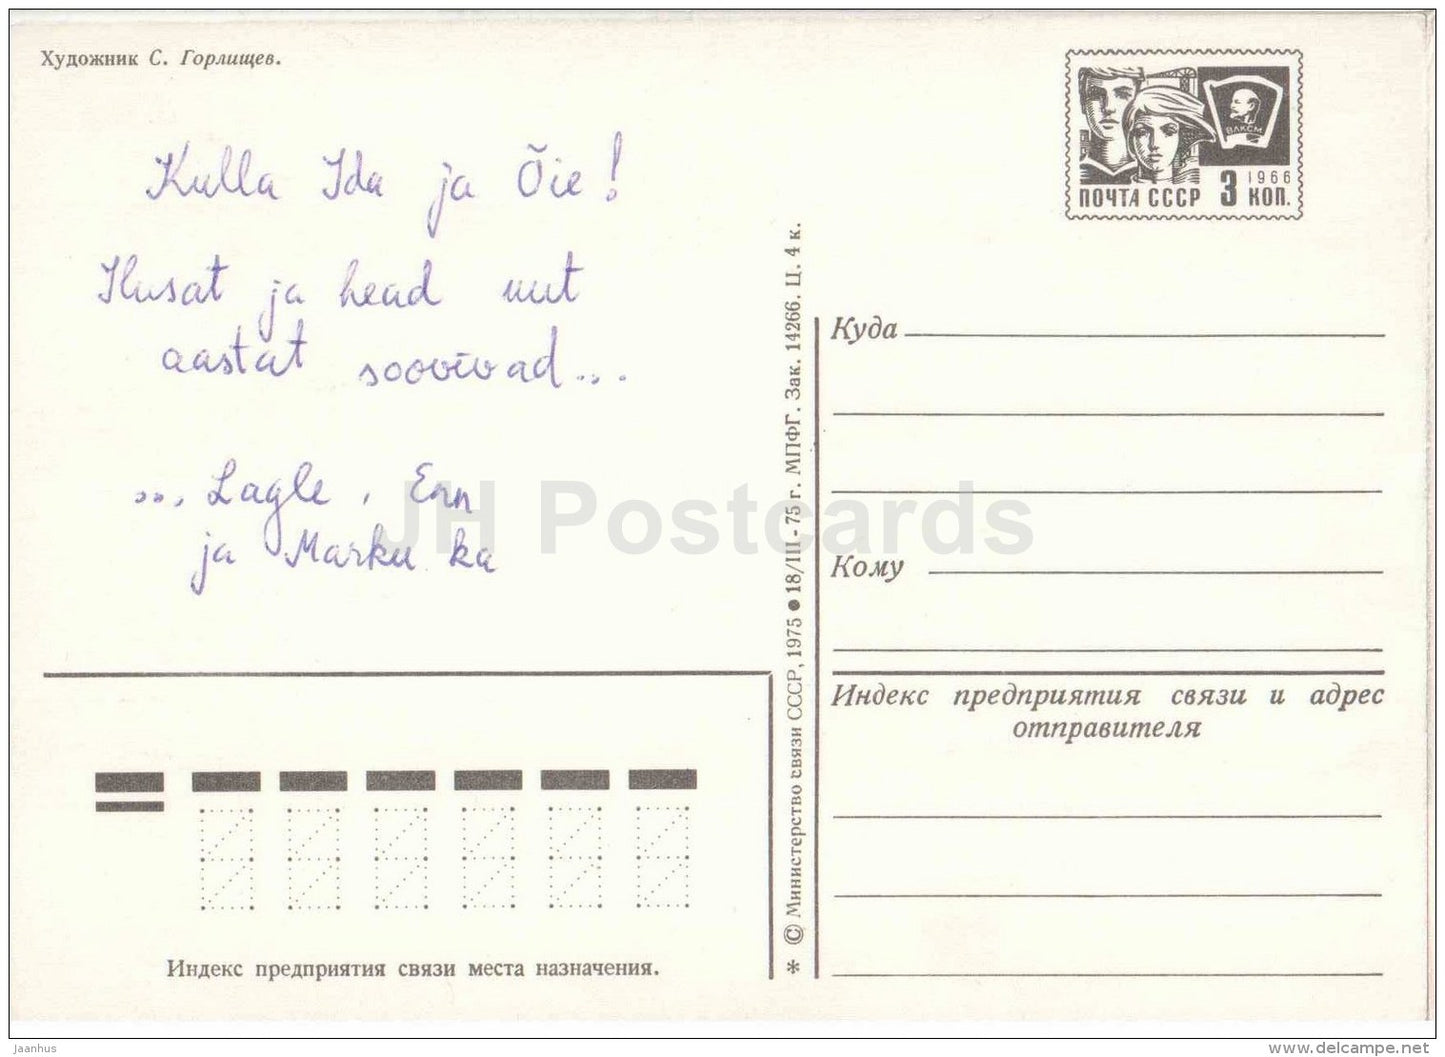 New Year Greeting card by S. Golischev - bird - postal stationery - 1975 - Russia USSR - used - JH Postcards